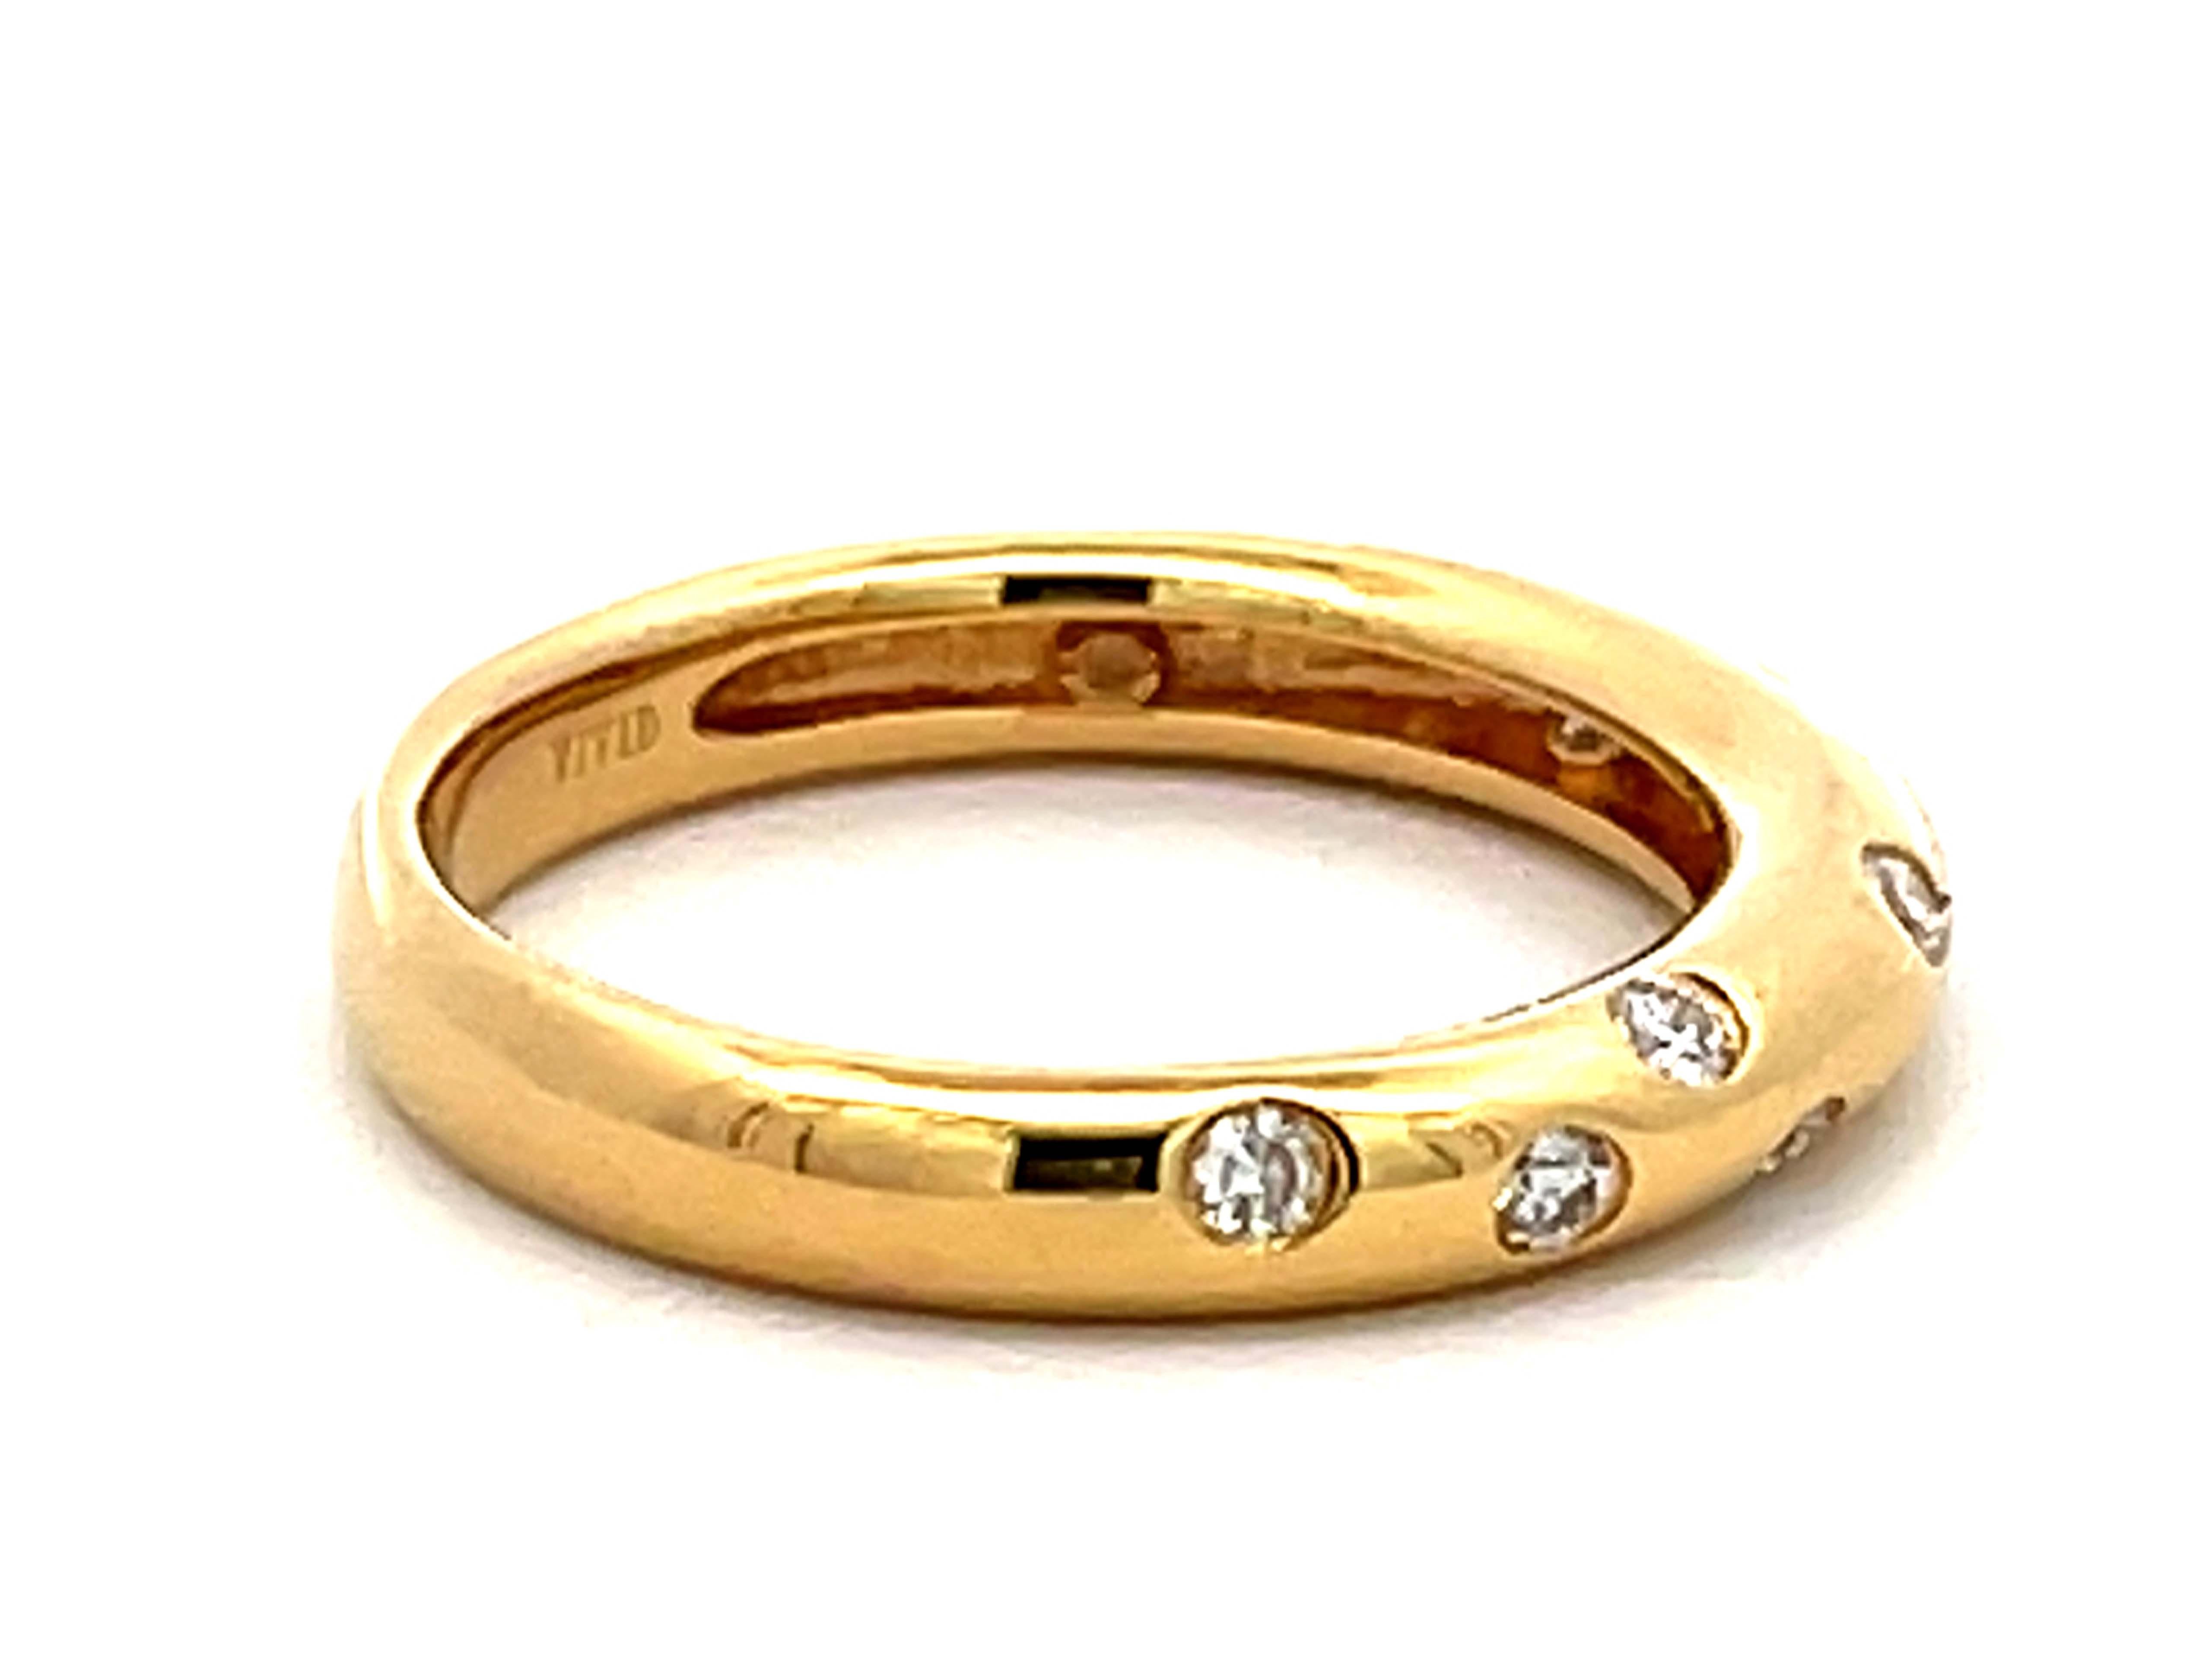 VIVID Rounded Diamond Band Ring 18K Yellow Gold In Excellent Condition For Sale In Honolulu, HI